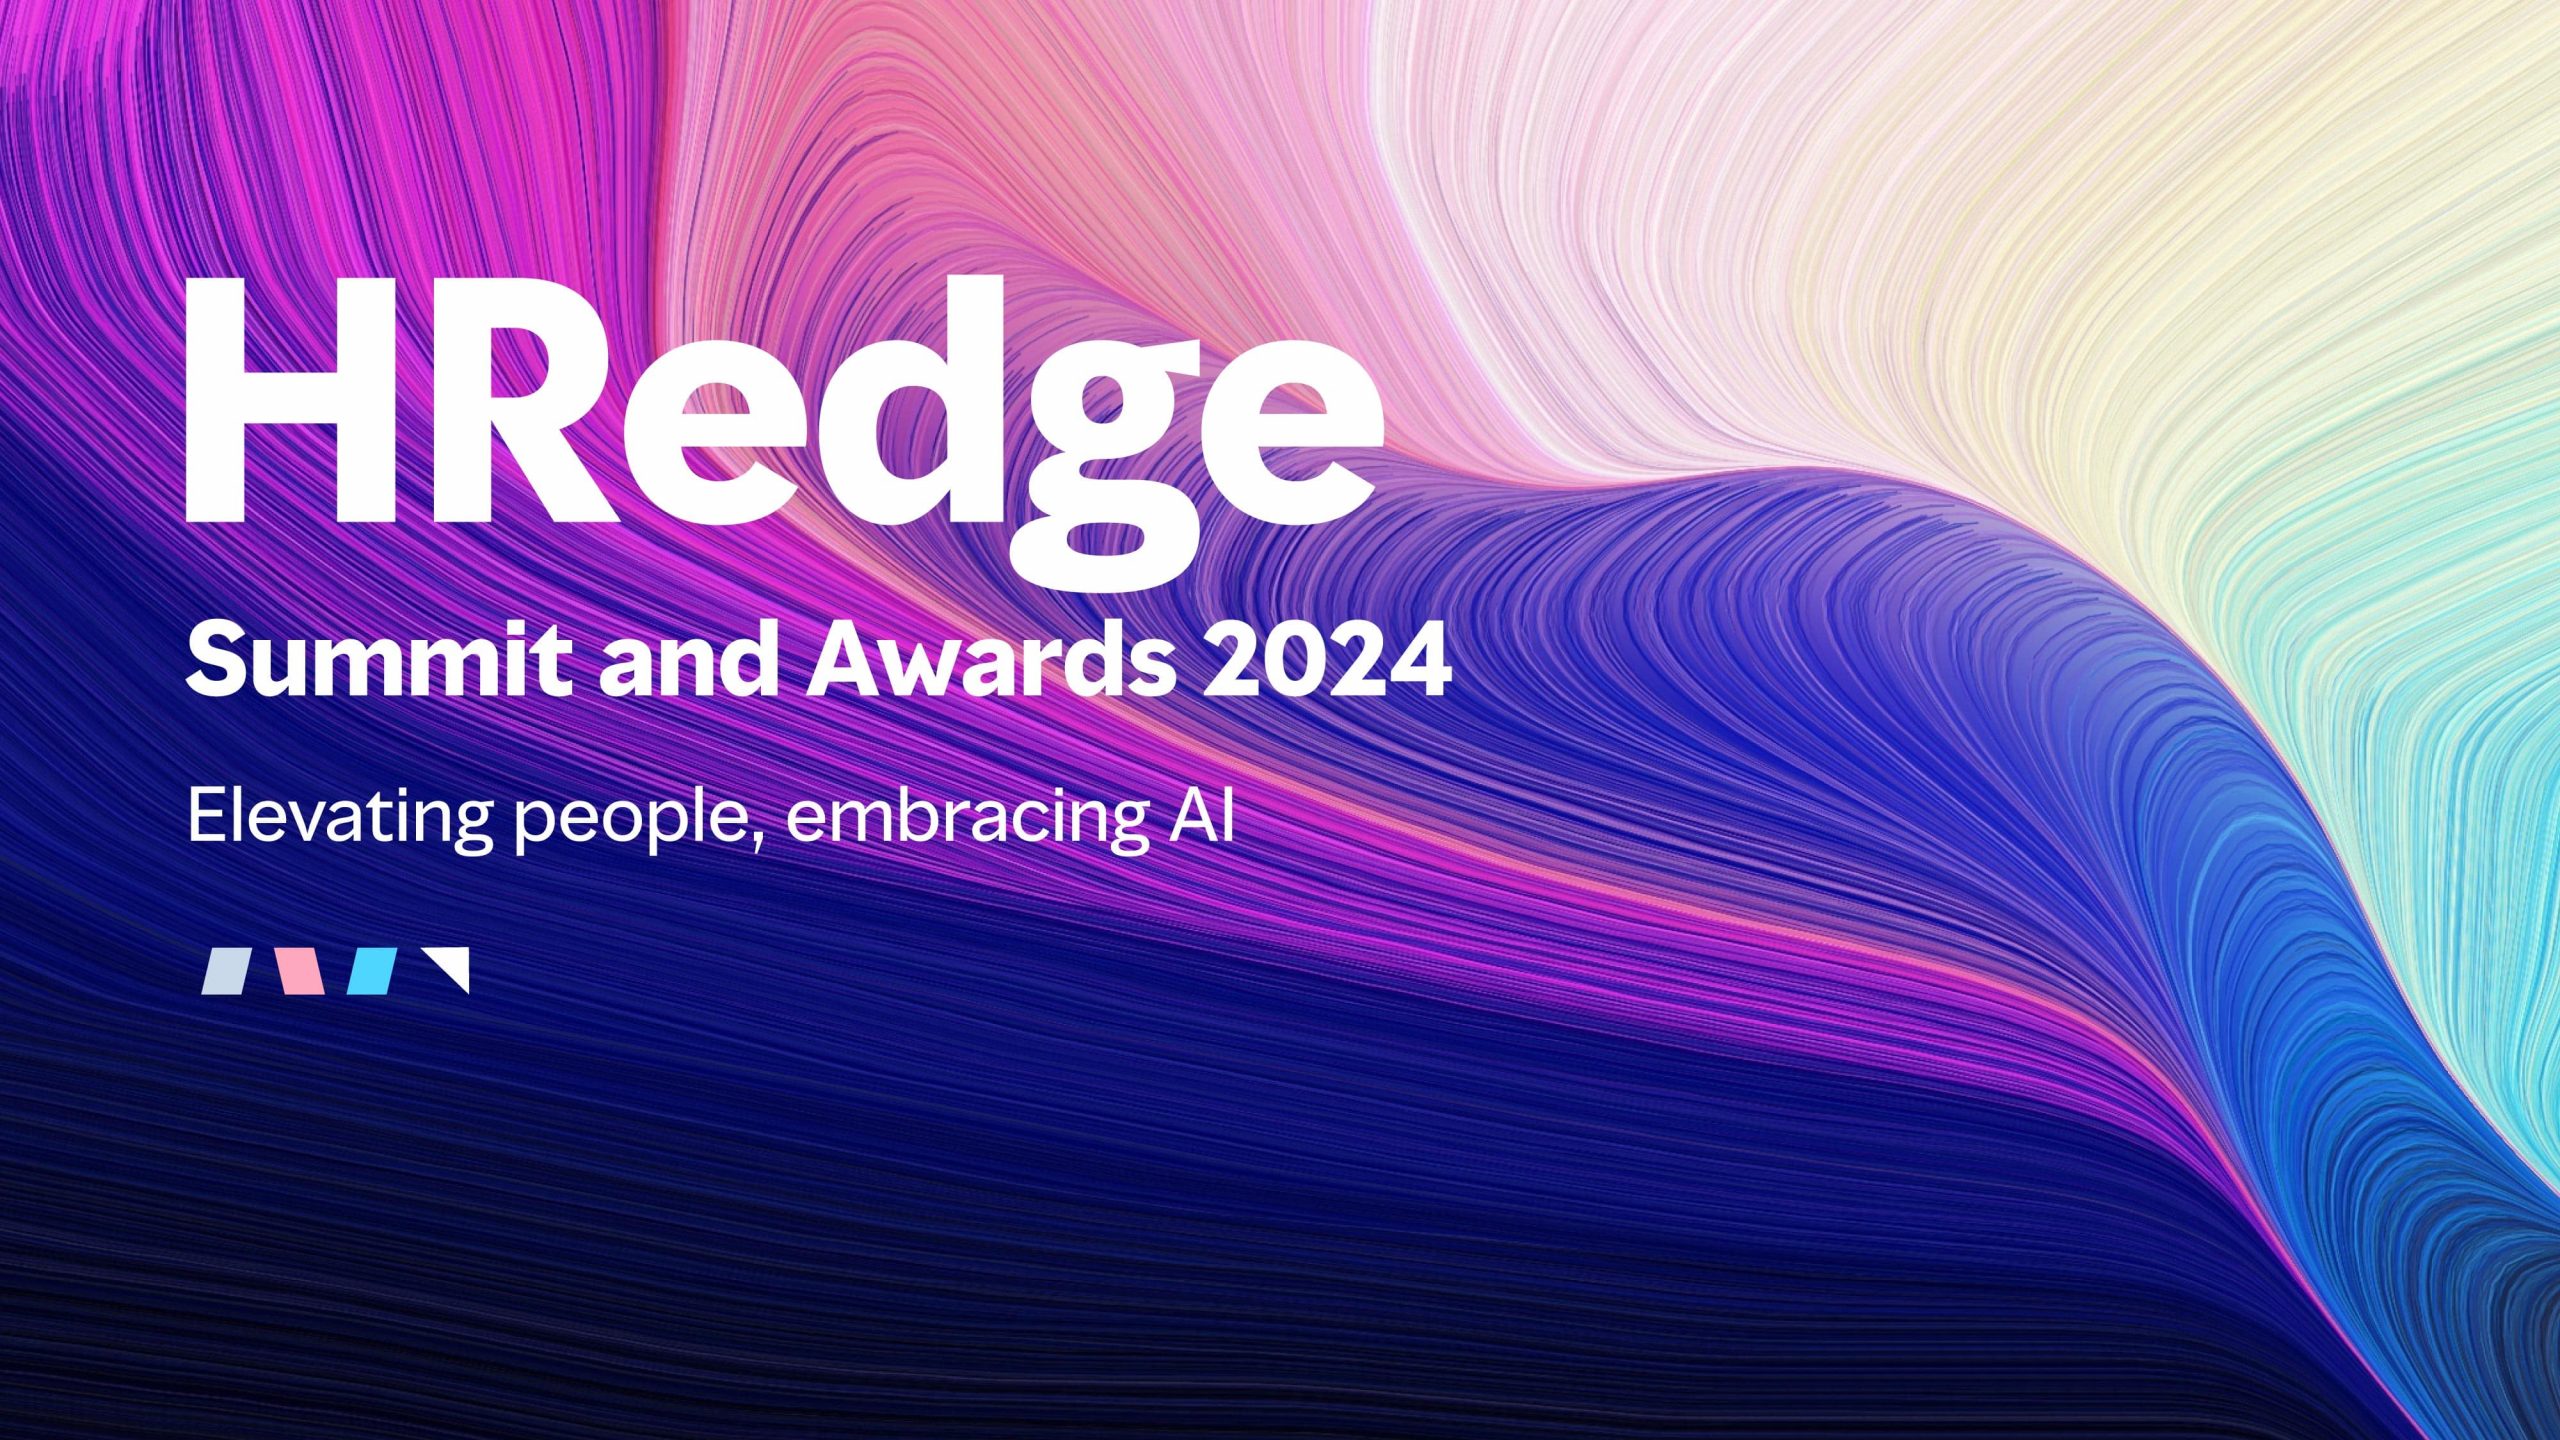 HRedge Summit and Awards 2024: Elevating people, embracing AI